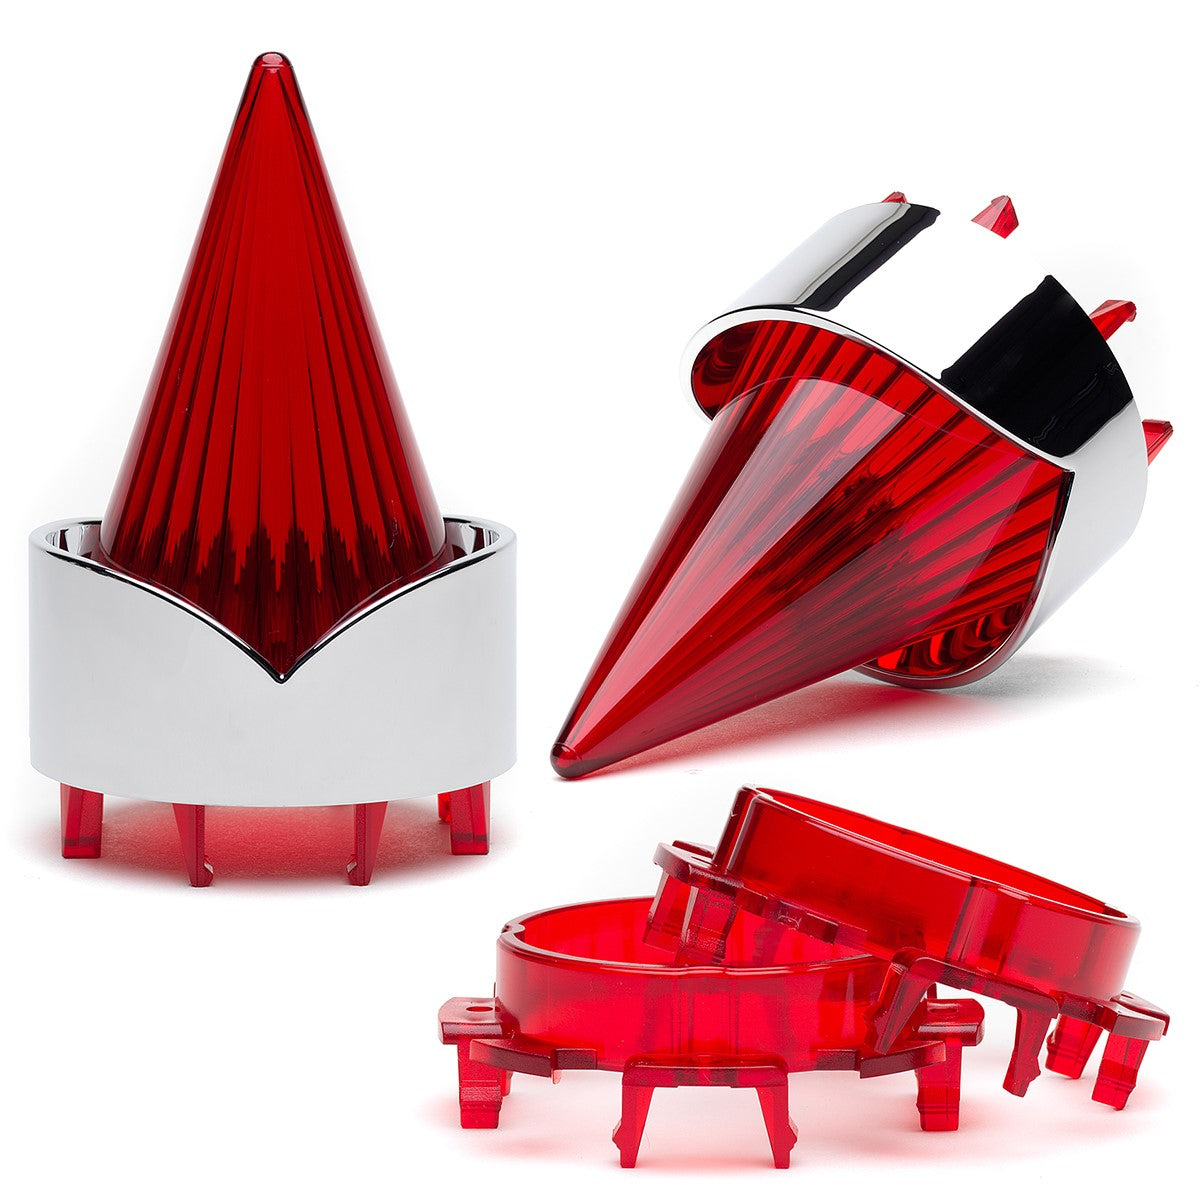 A set of red and silver Harley Davidson Turn Signal Lenses - Screw in Style cones by Cuztom Kraft.